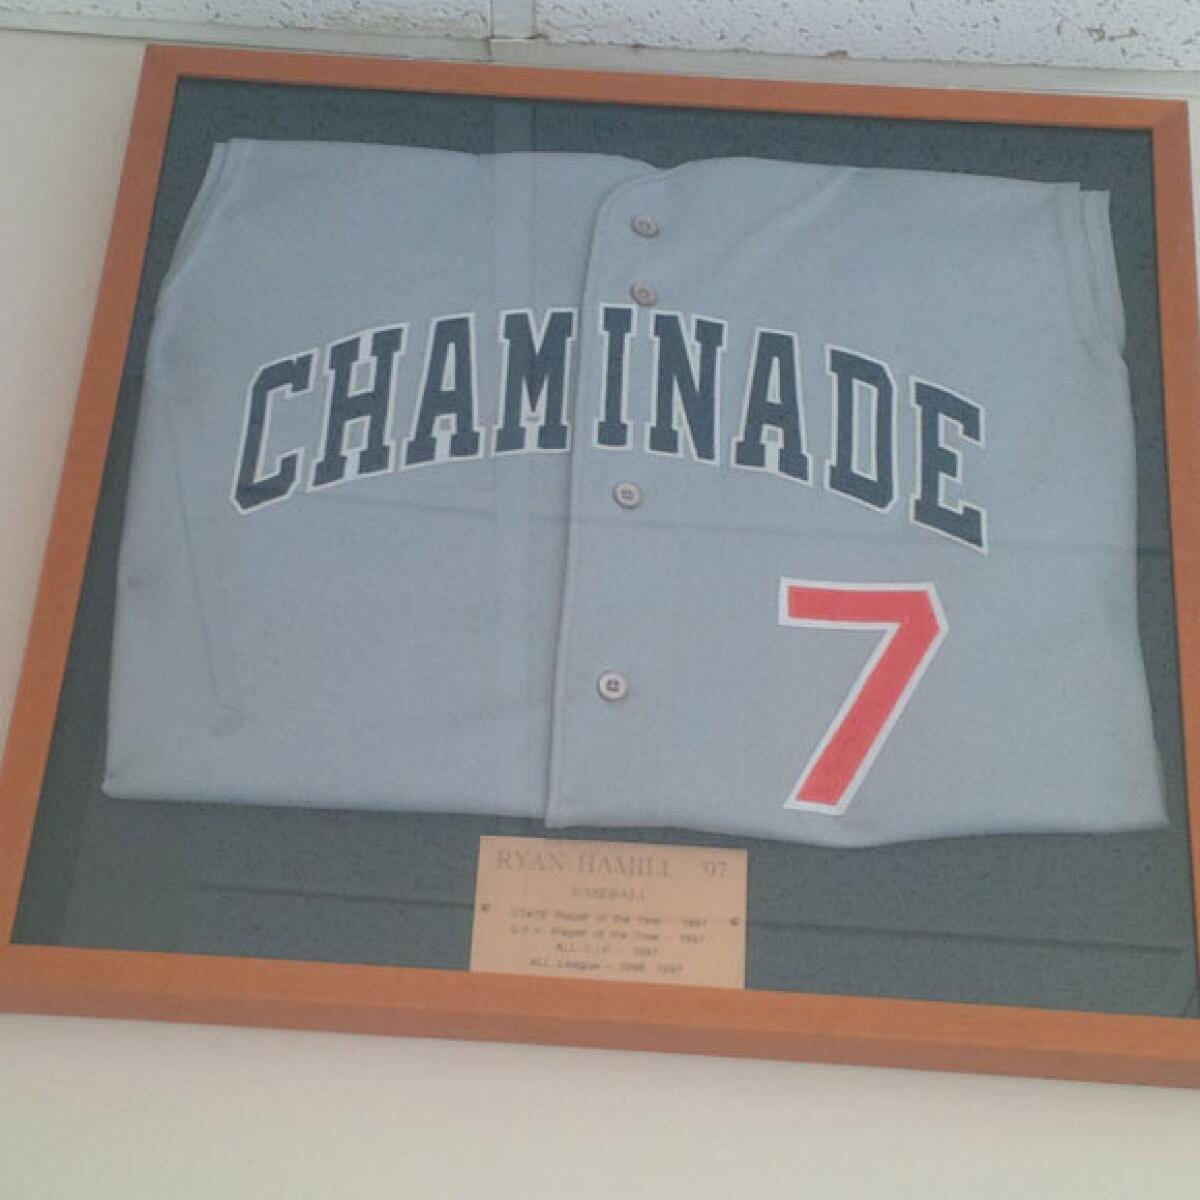 The jersey of Chaminade baseball standout Ryan Hamill (class of 1997).